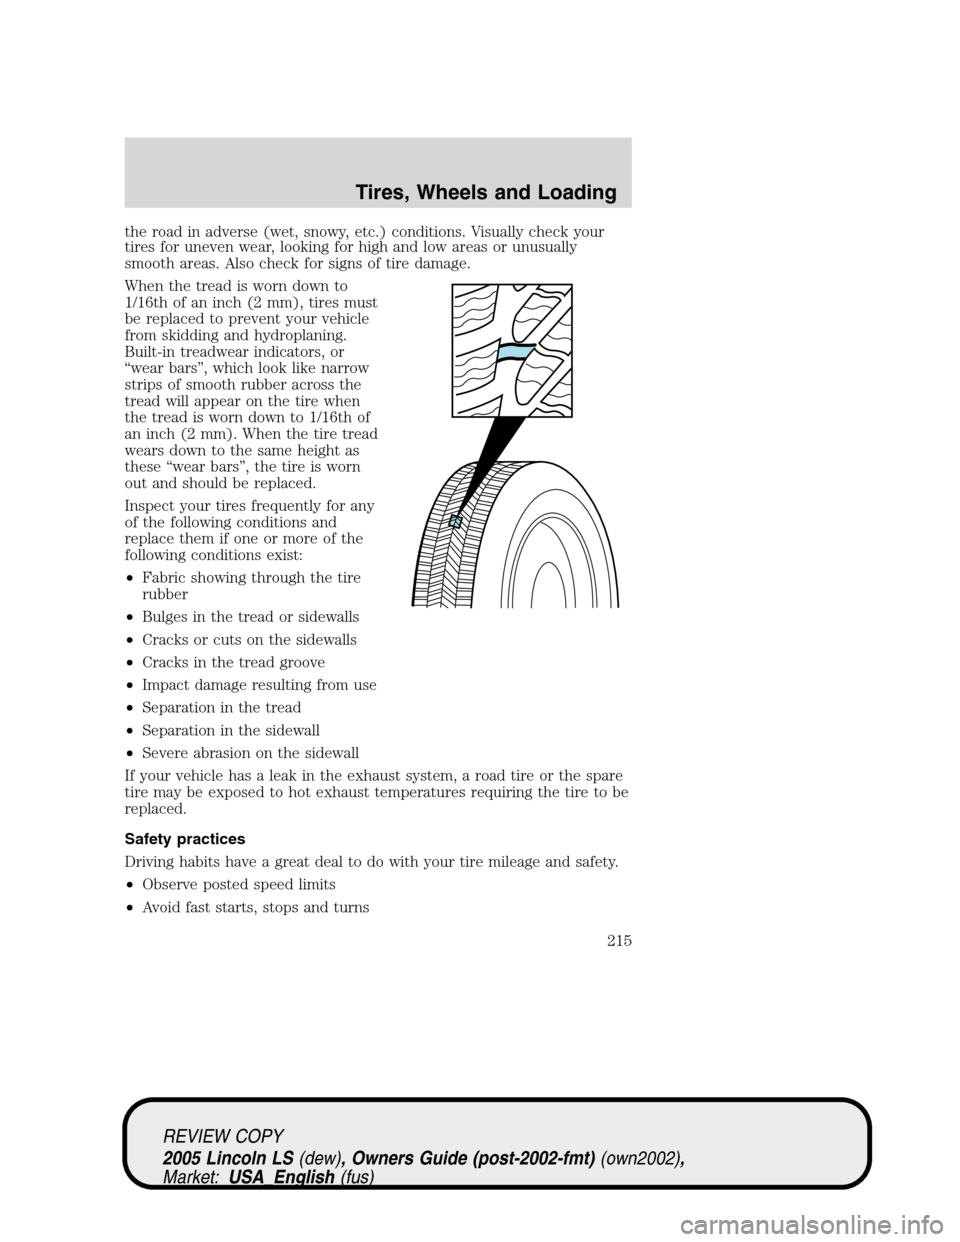 LINCOLN LS 2005  Owners Manual the road in adverse (wet, snowy, etc.) conditions. Visually check your
tires for uneven wear, looking for high and low areas or unusually
smooth areas. Also check for signs of tire damage.
When the tr